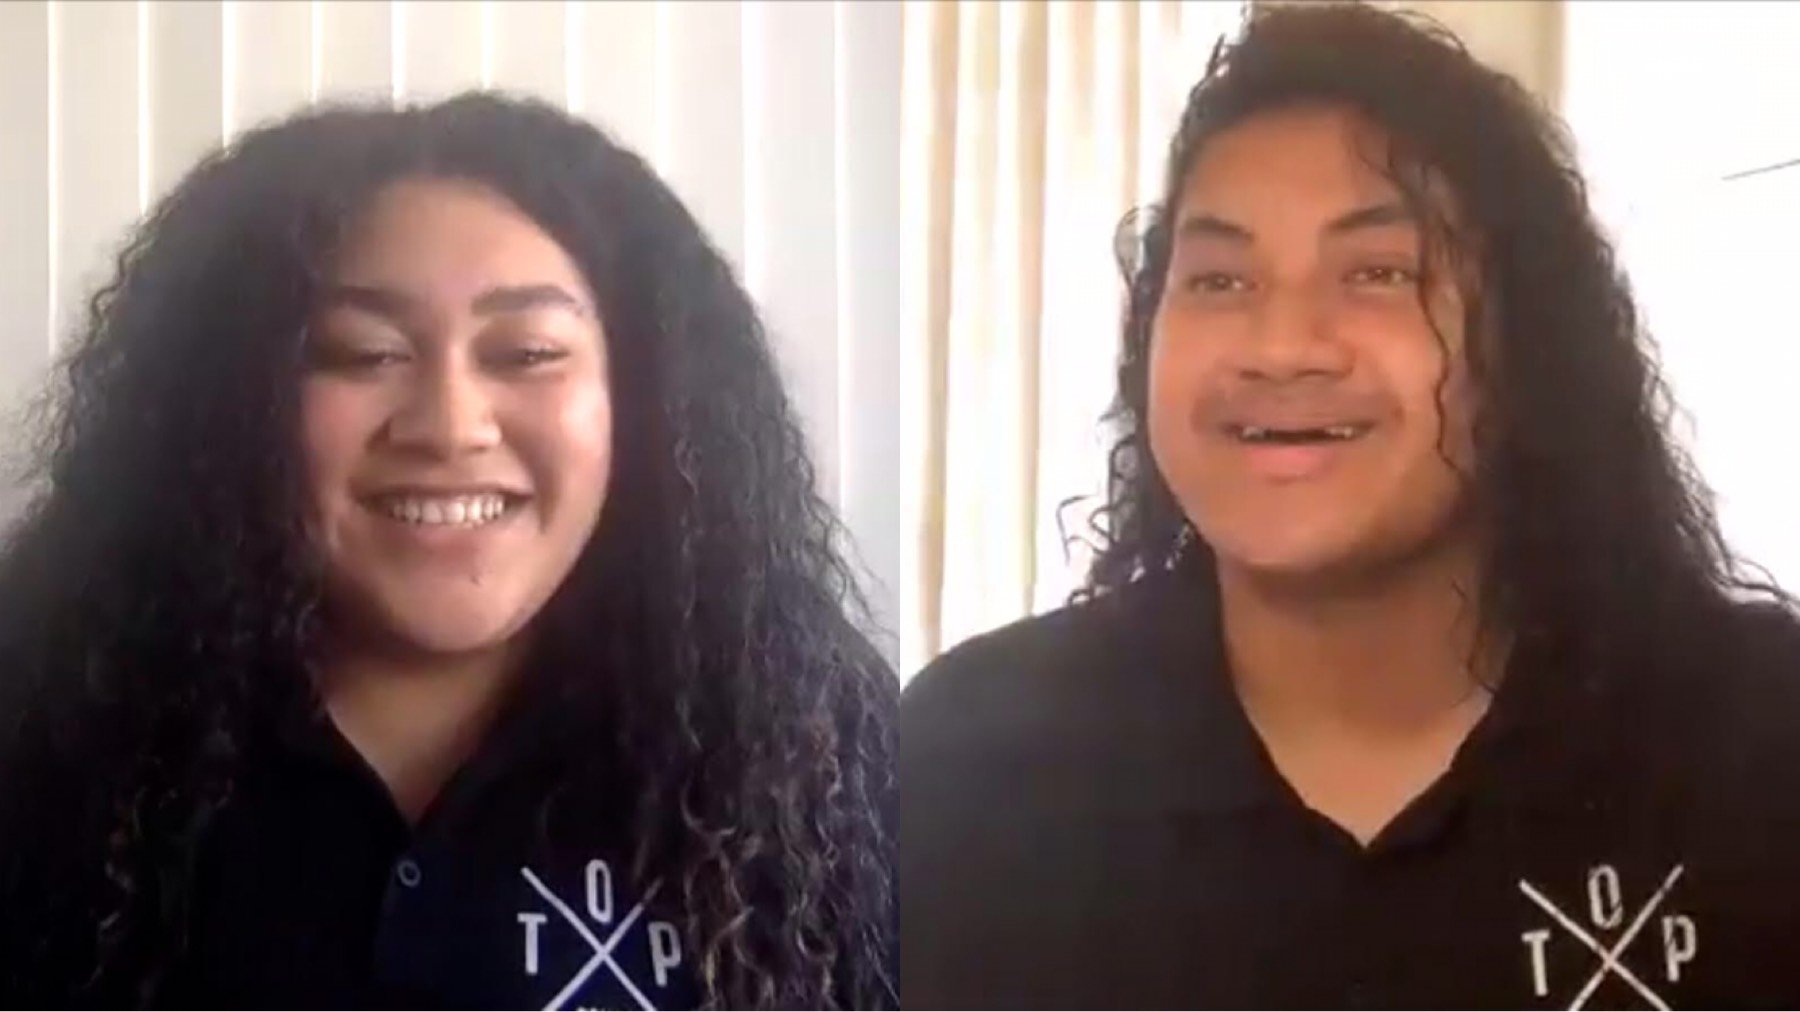 Co-chairs of The Ōtara-Papatoetoe Squad spoke with Tagata Pasifika about their Covid community outreach.